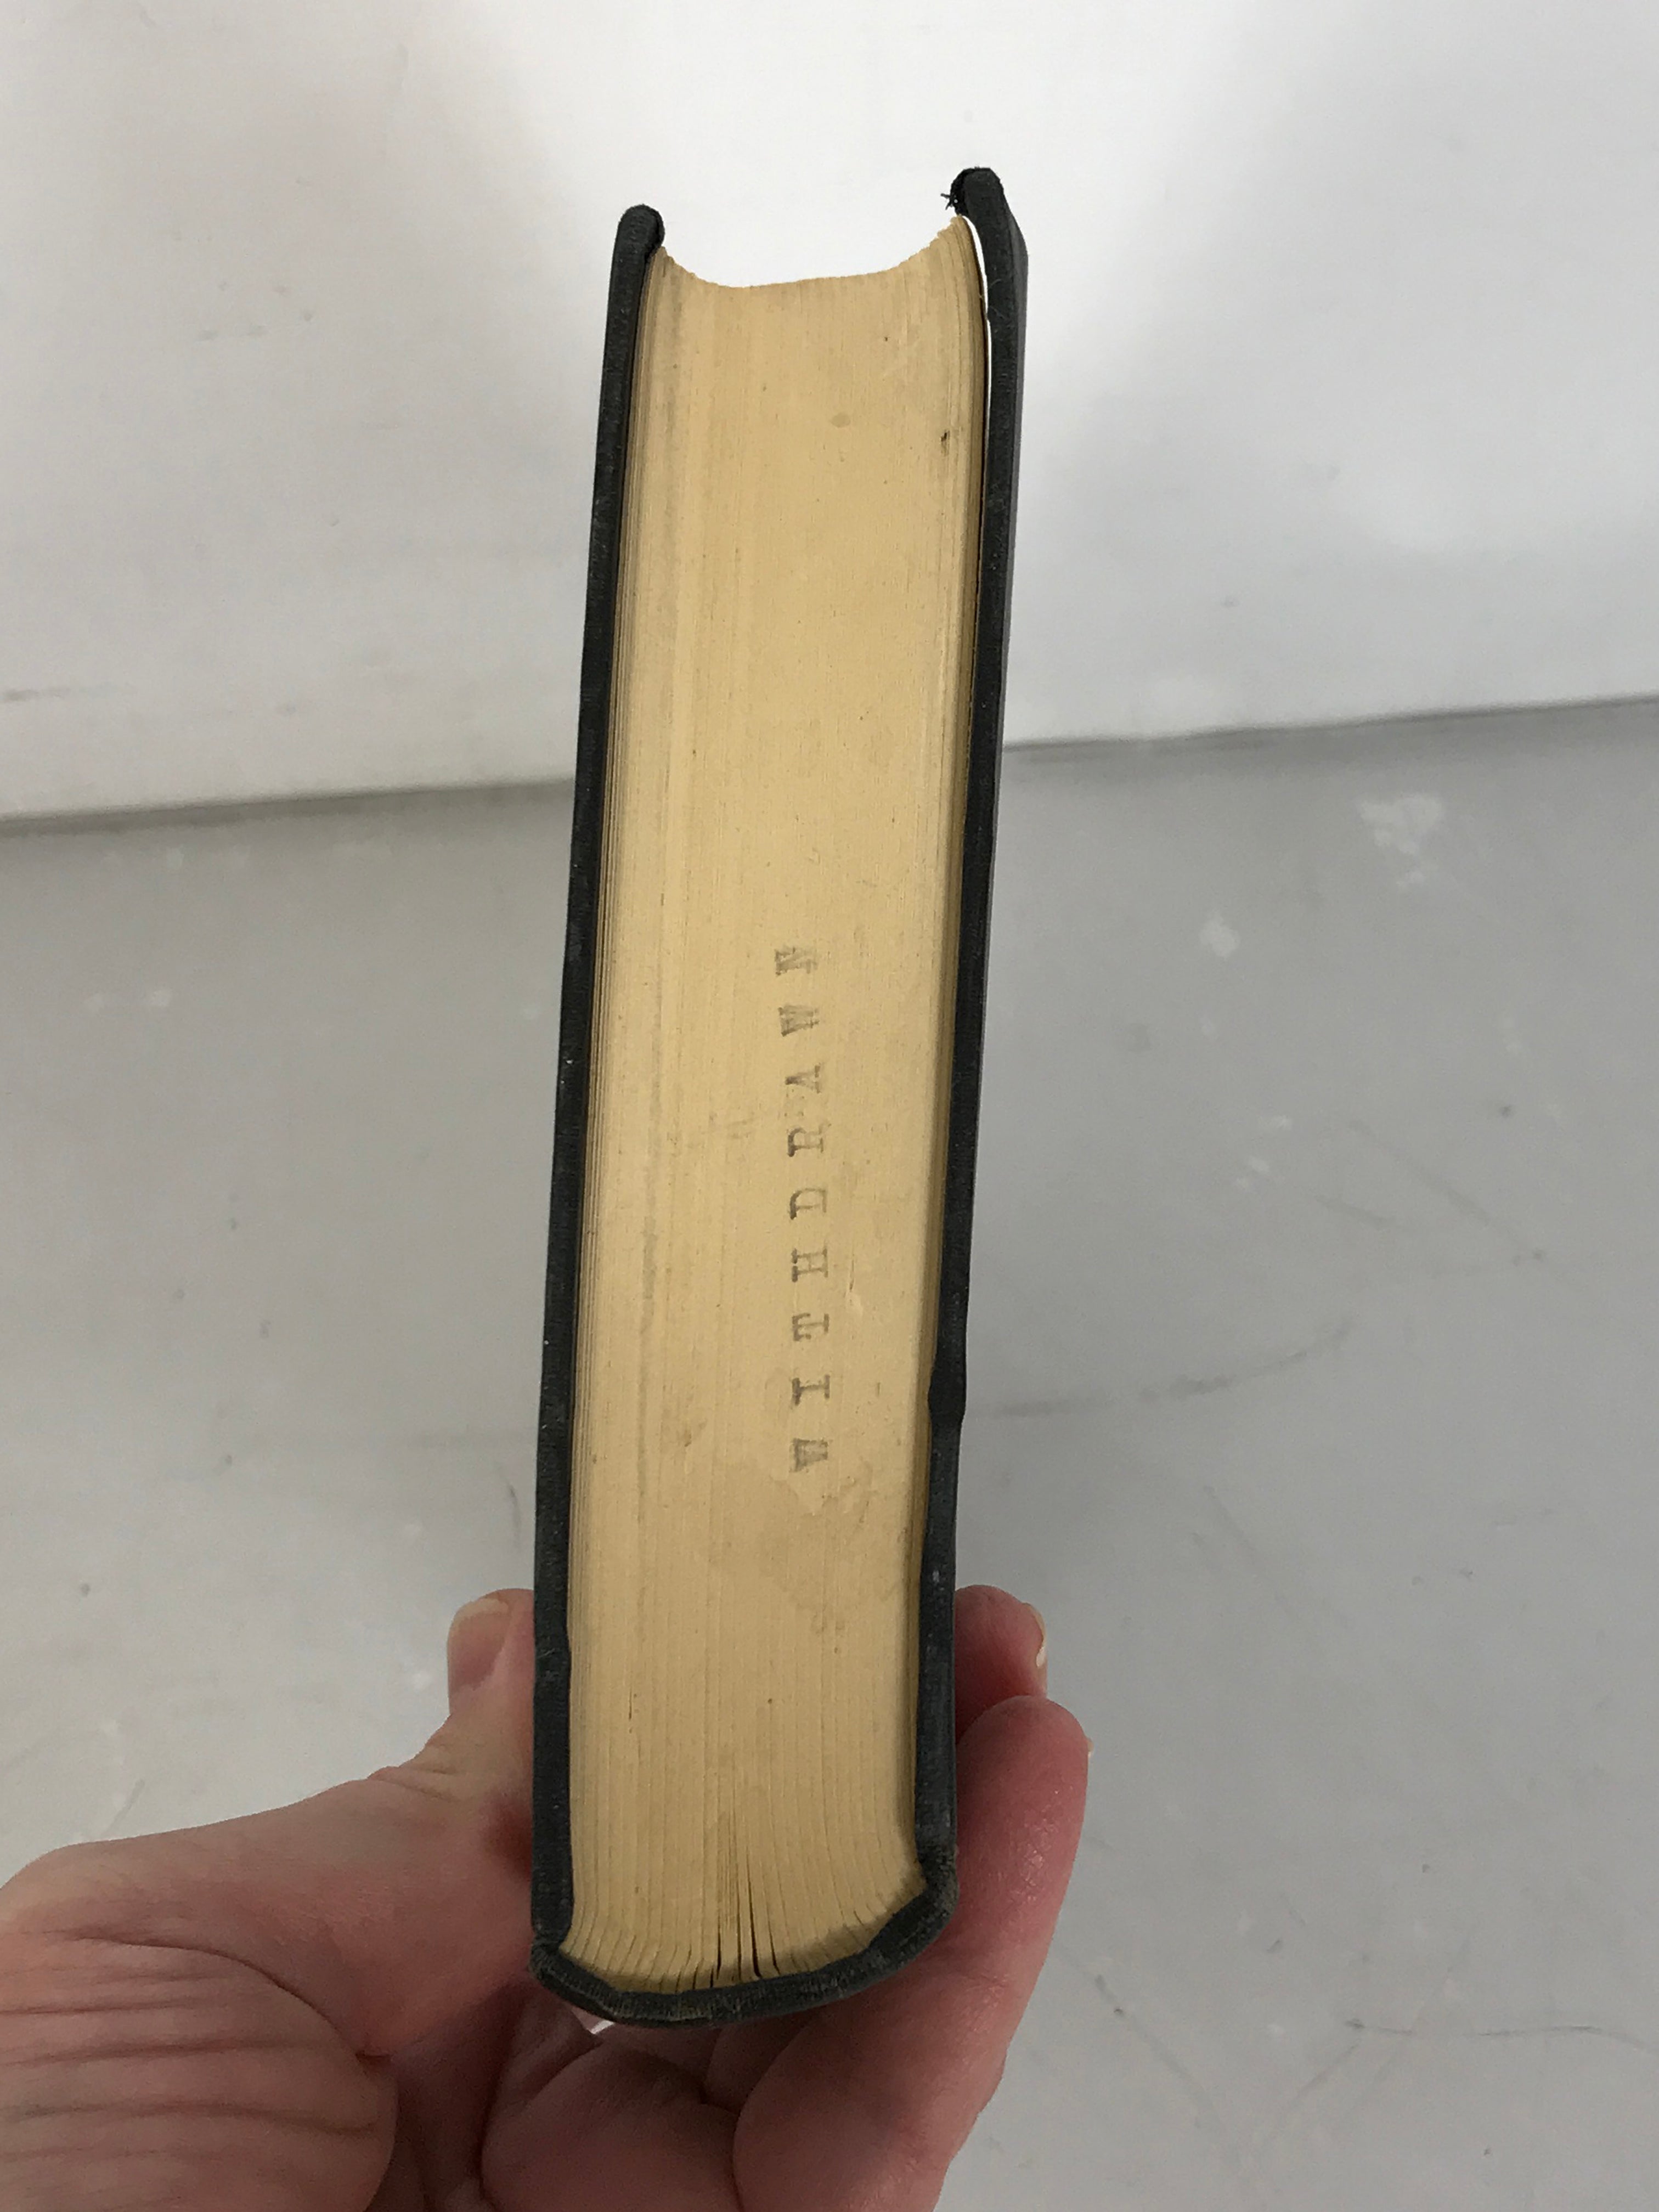 A Hundred Years of Biology by Ben Dawes 1952 HC